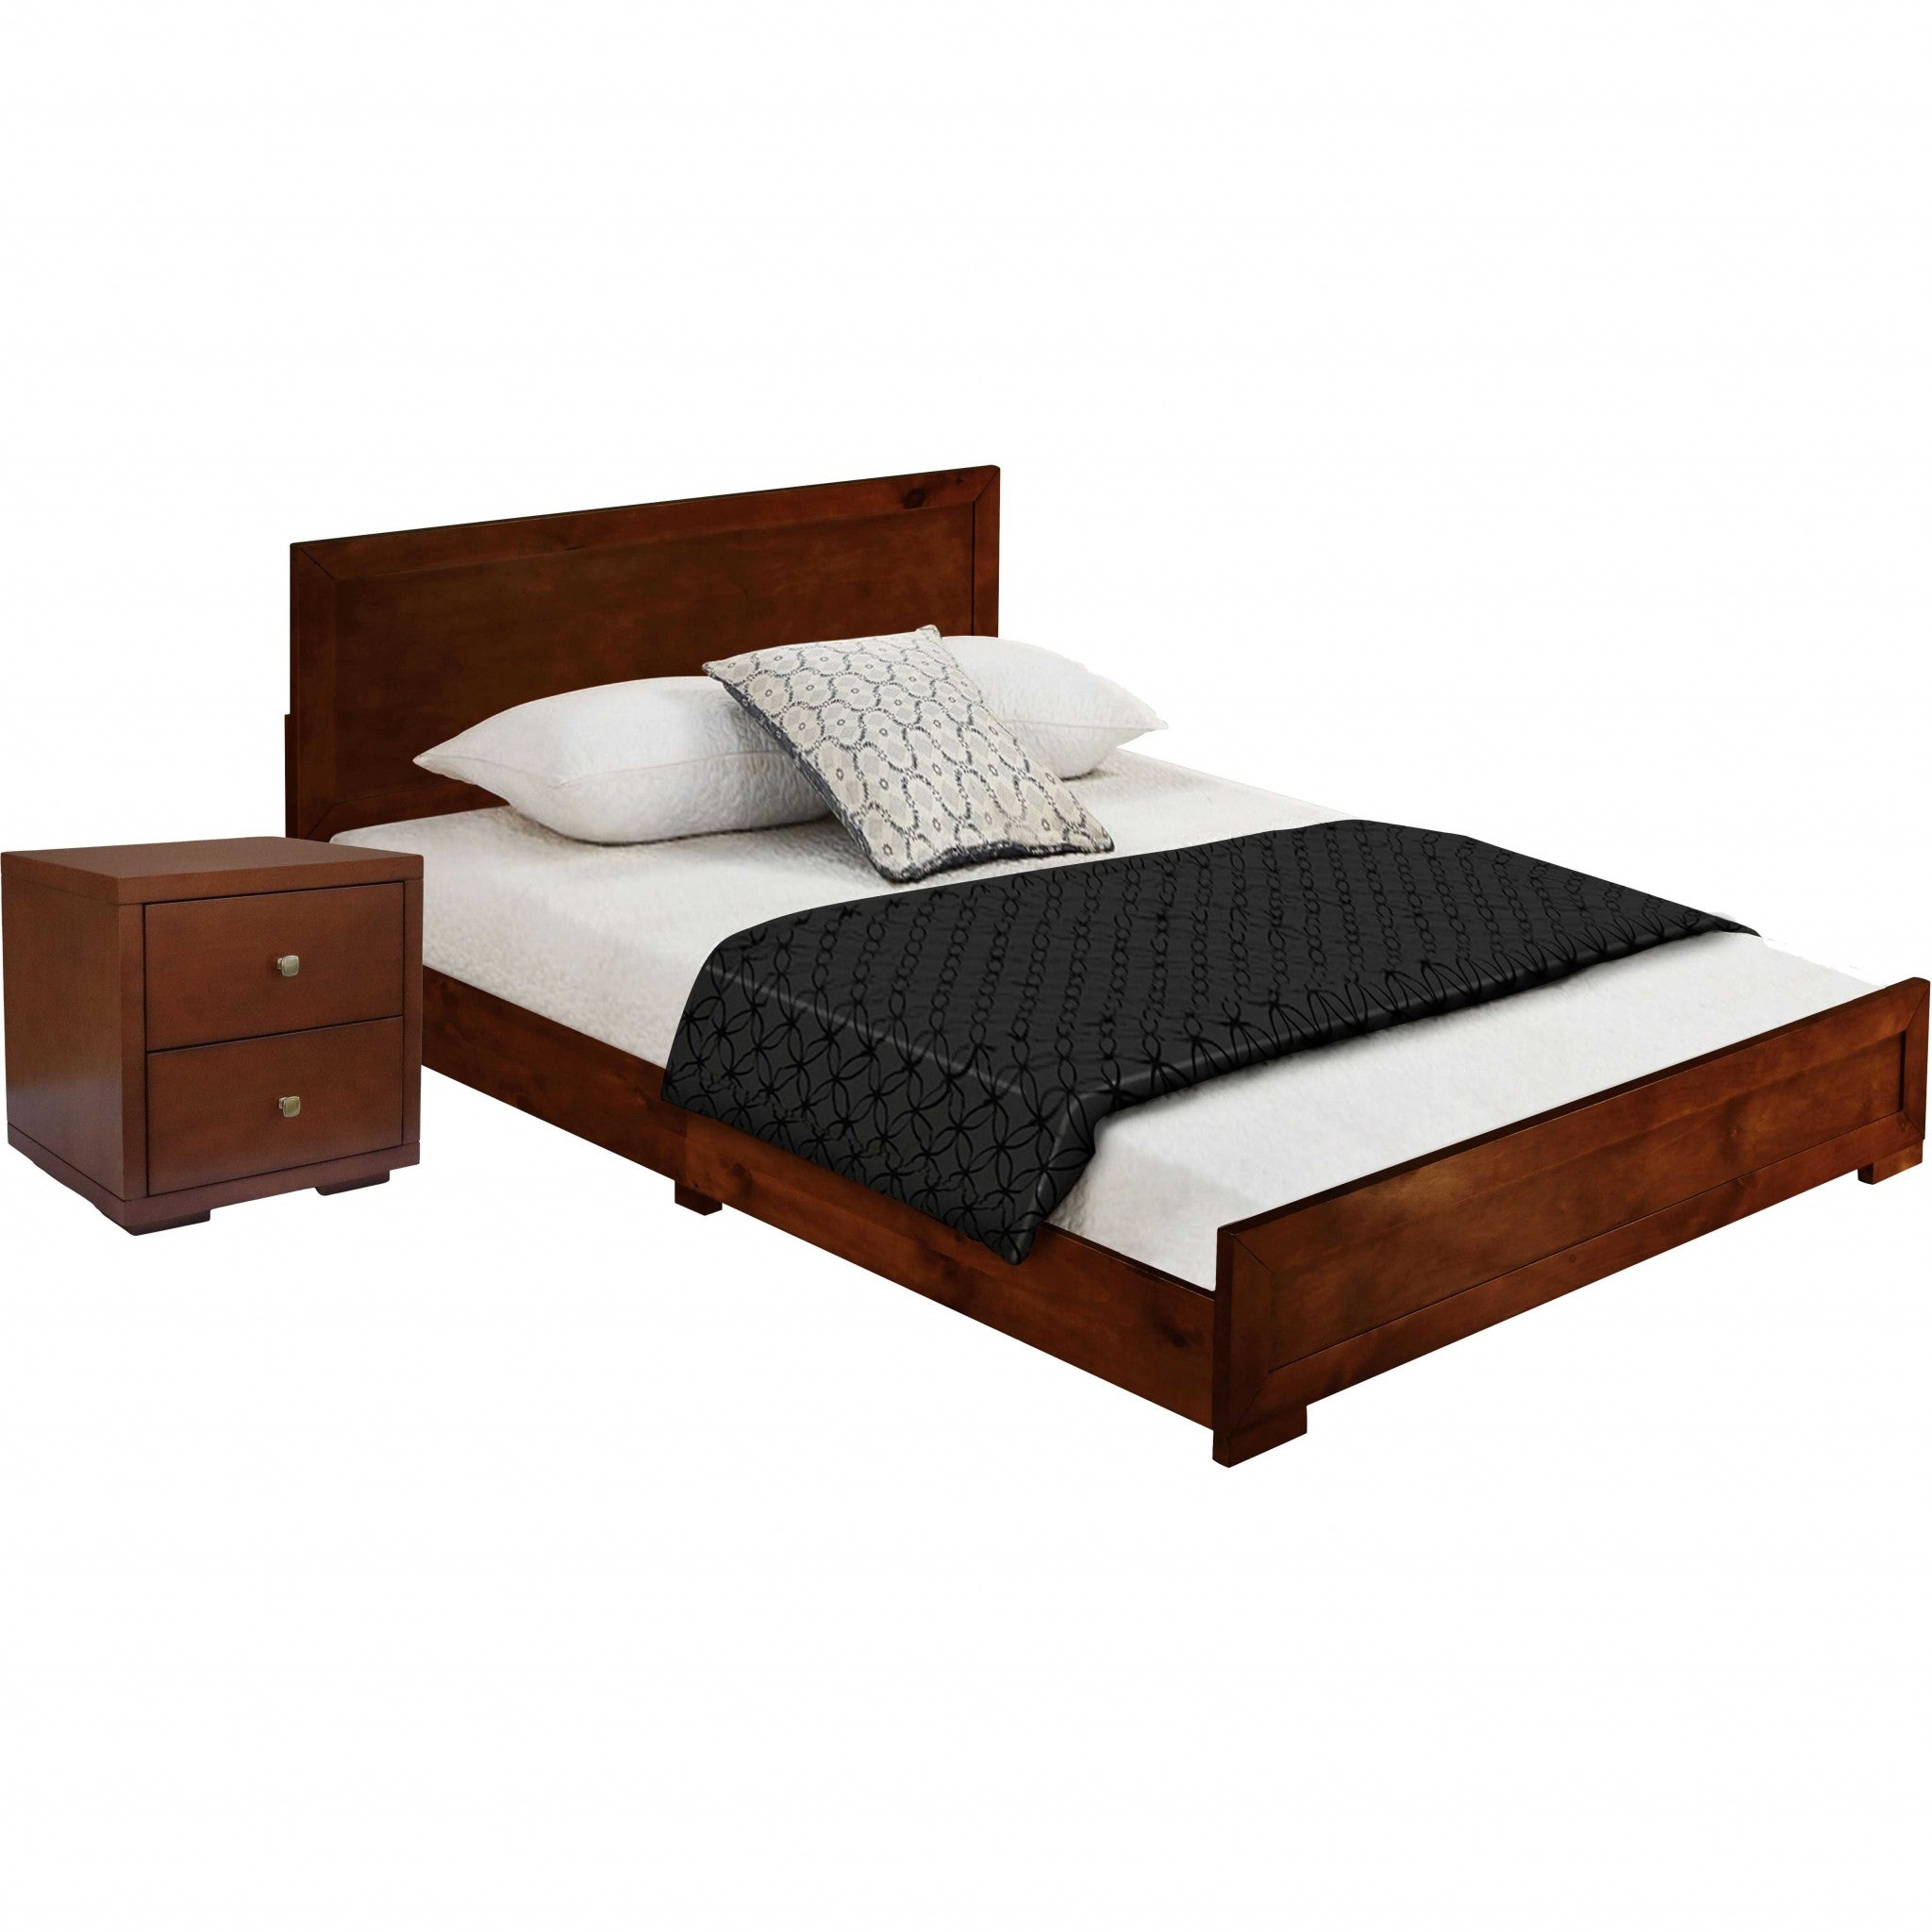 Moma Walnut Wood Platform Twin Bed With Nightstand